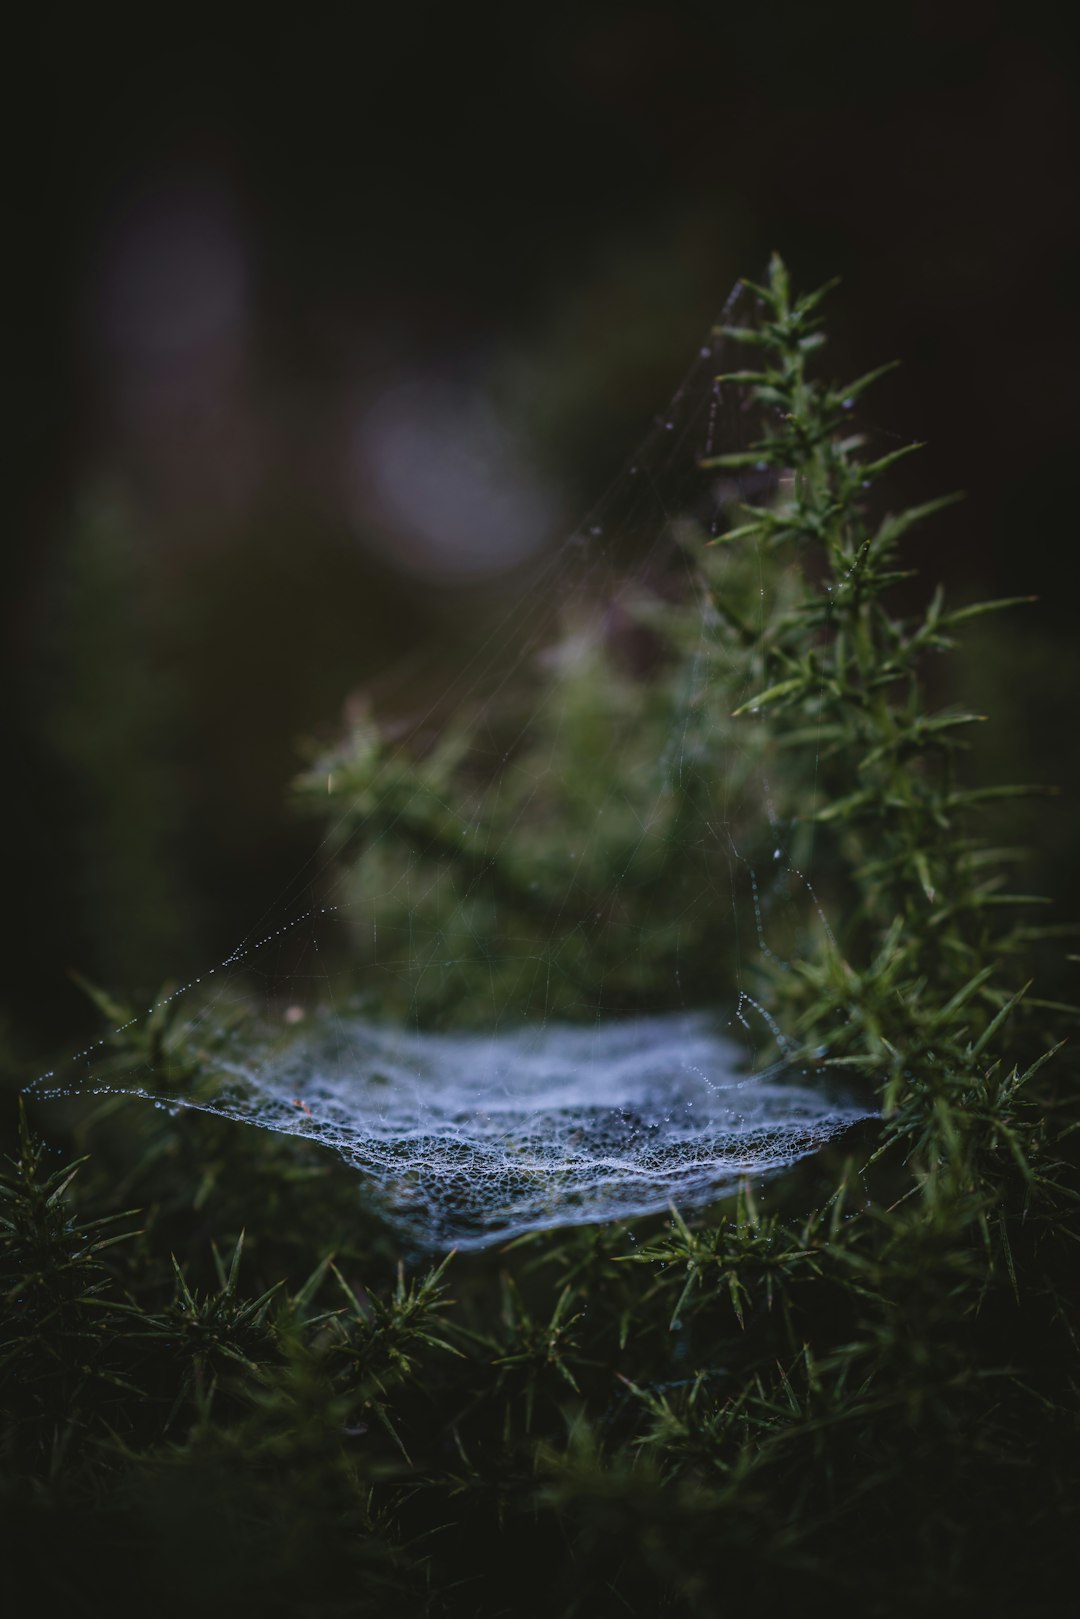 selective focus photography of spider web